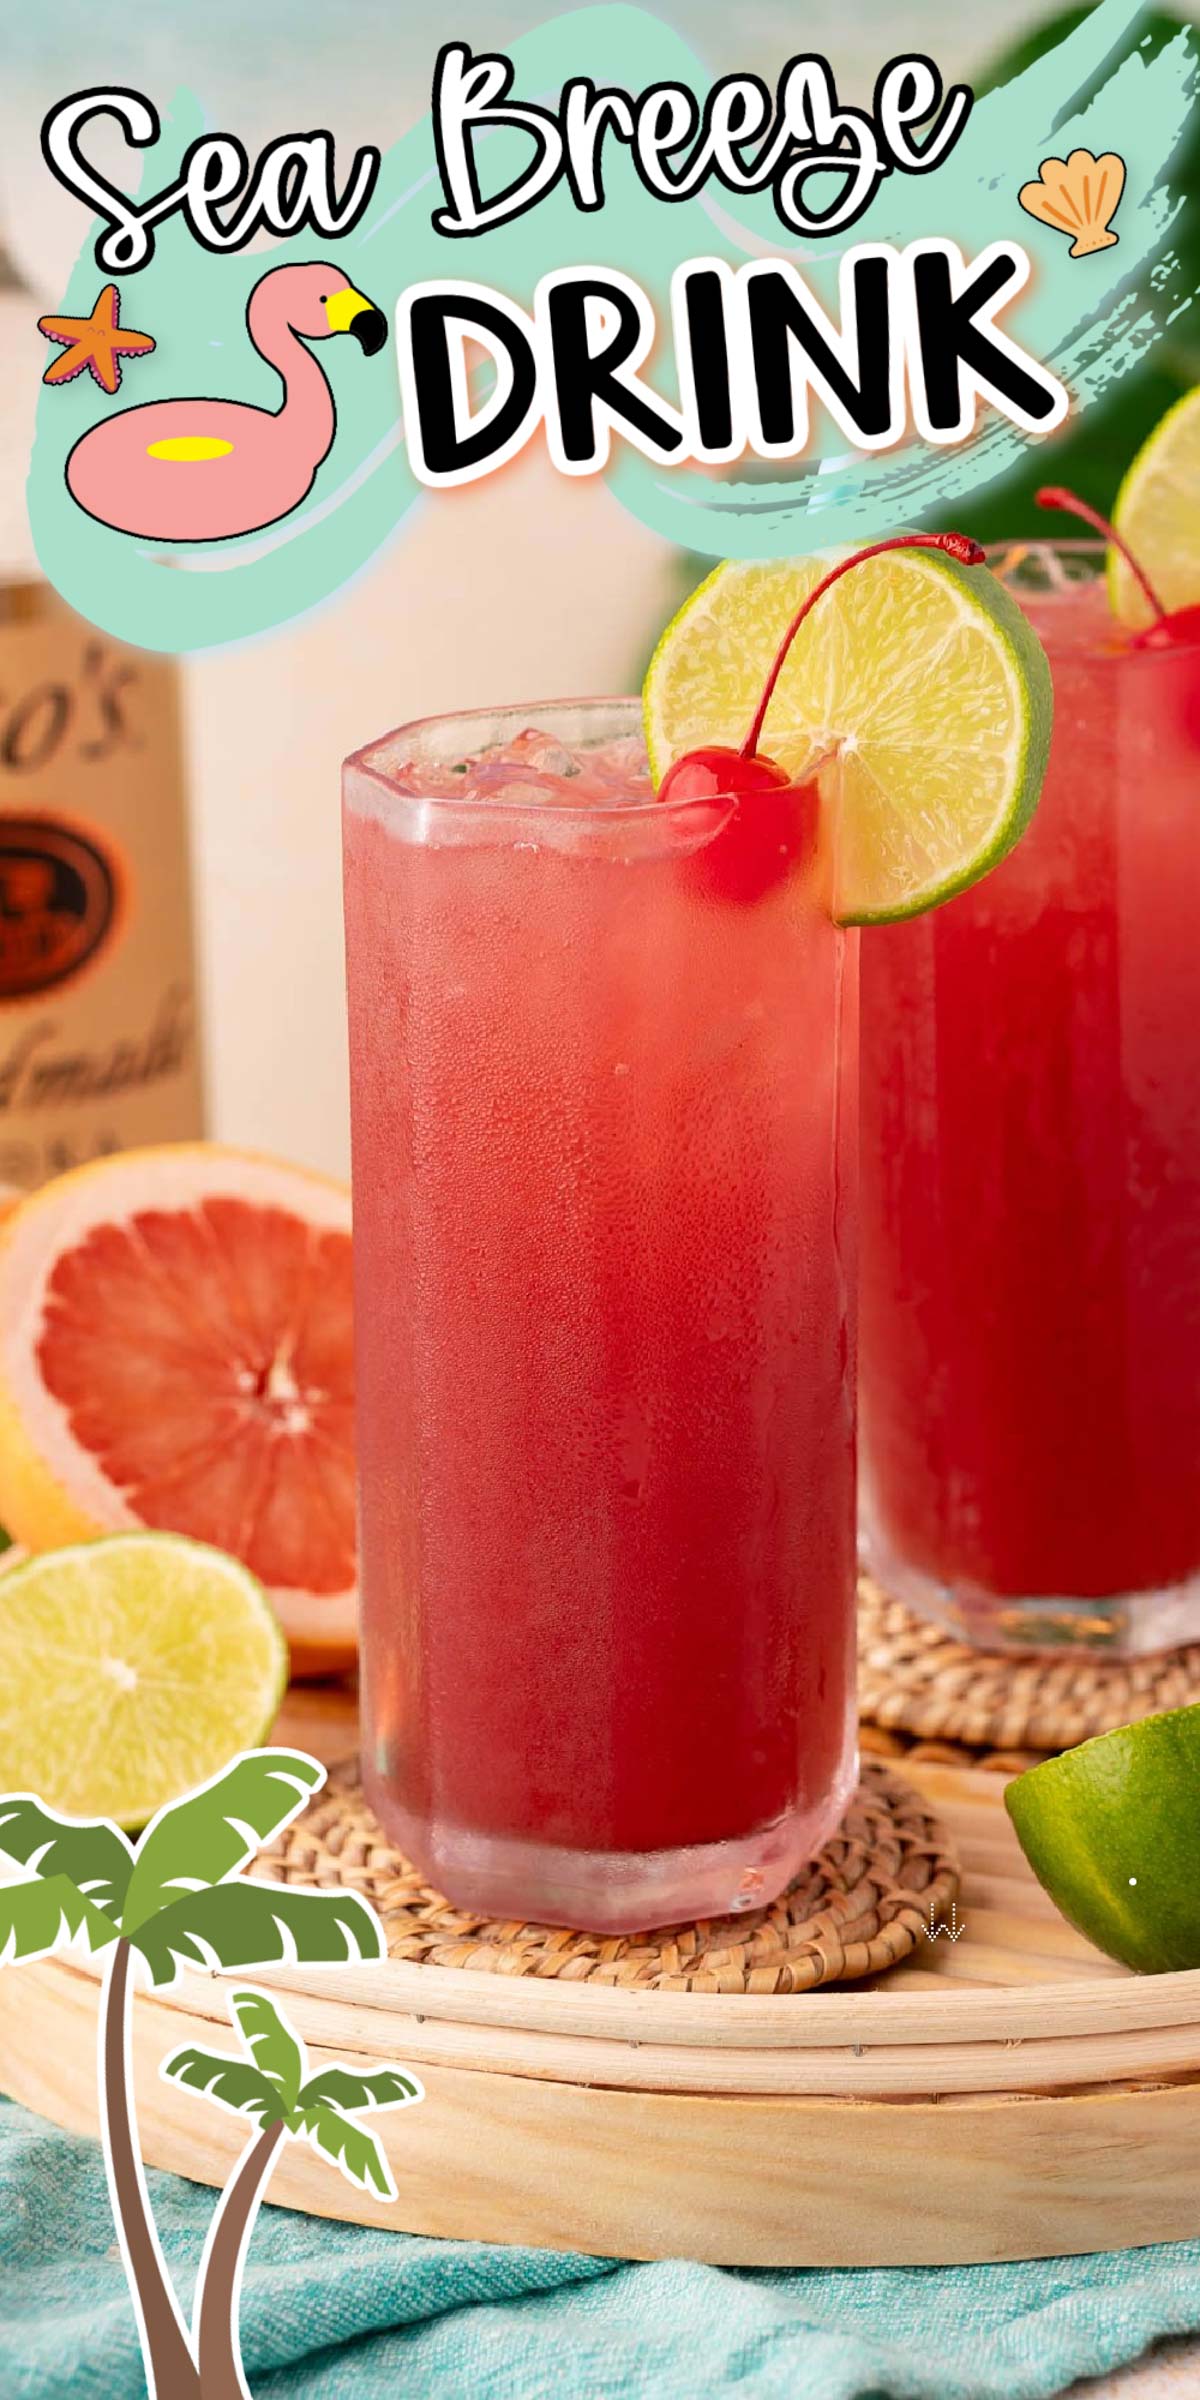 A Sea Breeze is an alcoholic mixed drink made with grapefruit, cranberry, and vodka. Its sweet yet sour flavor makes it a popular chilled cocktail to enjoy in summer! via @sugarandsoulco